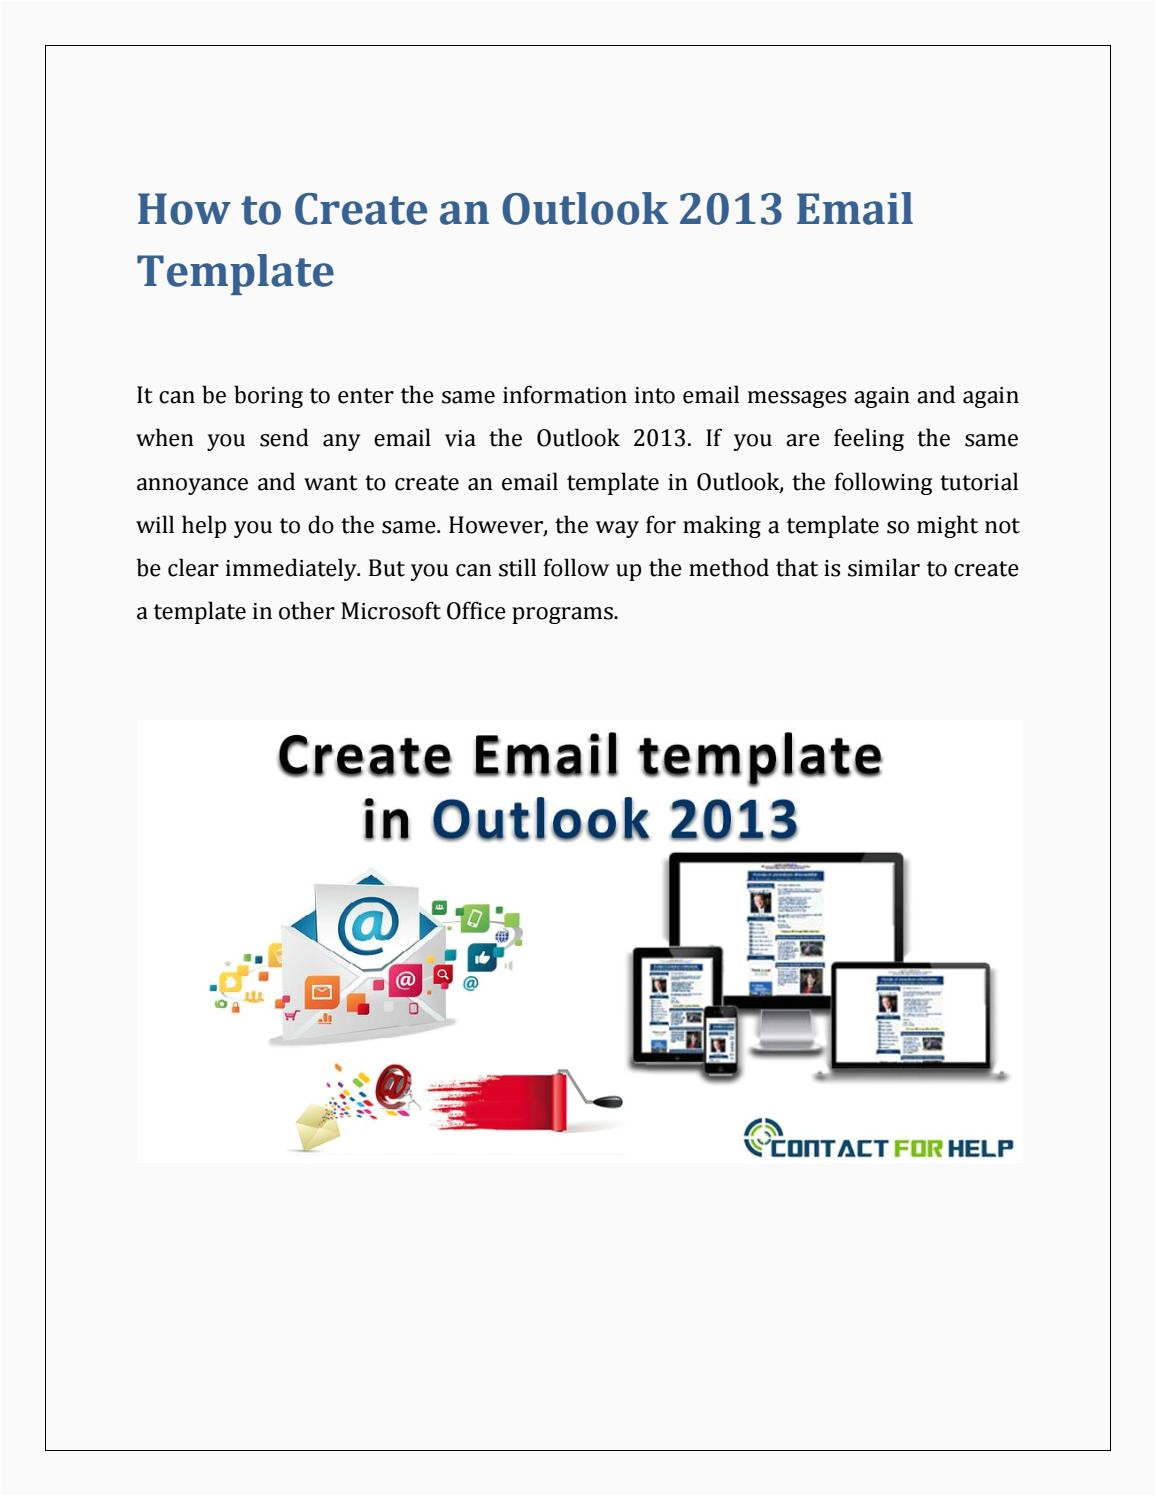 How to Make An Email Template In Outlook 2013 Create An Email Template In Outlook 2013 by Lisa Heydon